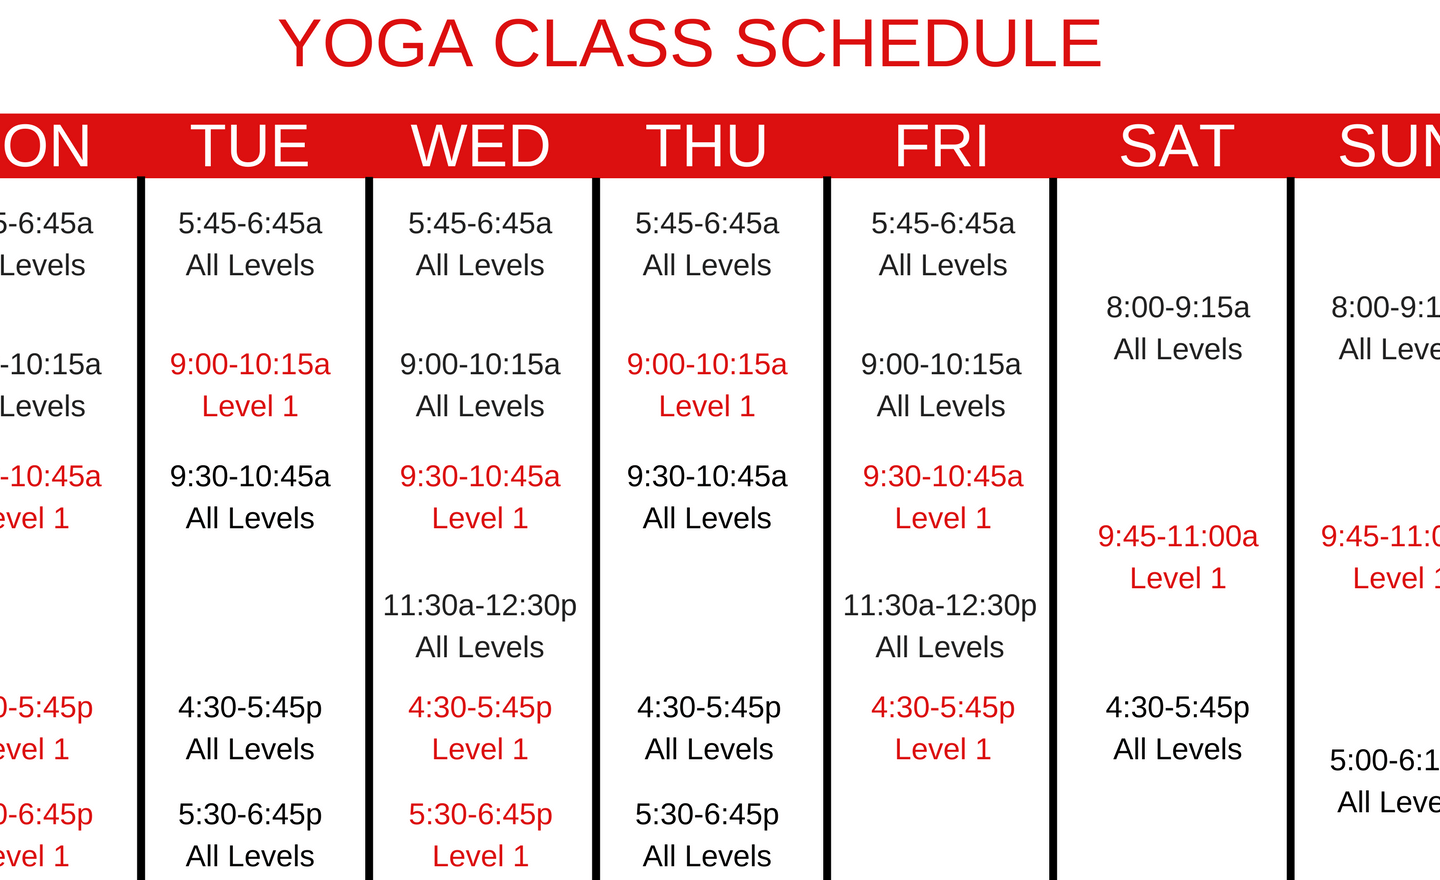 Recommended Beginning Yoga Schedule One Flow Yoga